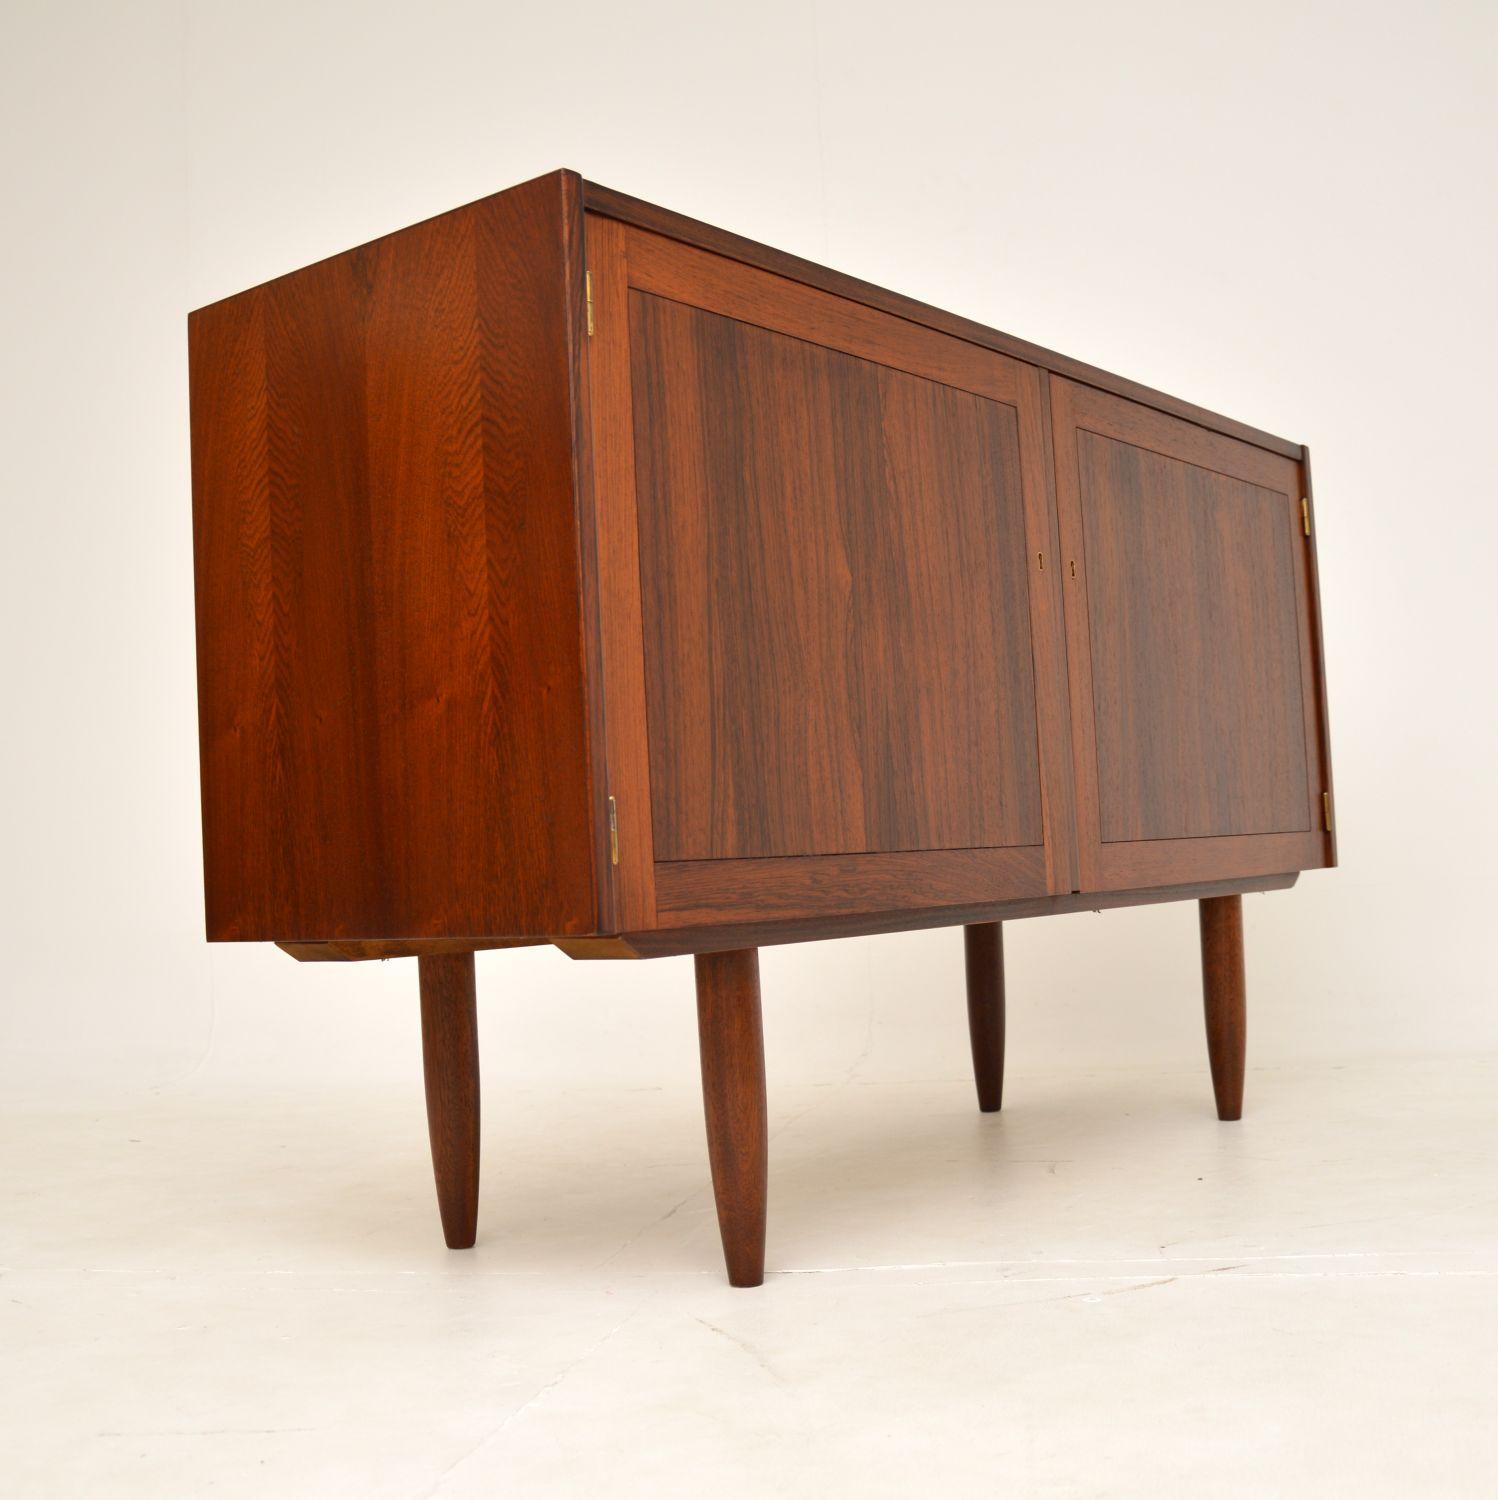 A very stylish and well made vintage wooden sideboard. This was made in Sweden, it was designed by Nils Jonsson and made by Troeds.

It is of lovely quality, with beautiful grain patterns and a gorgeous colour tone. The interior is lined with